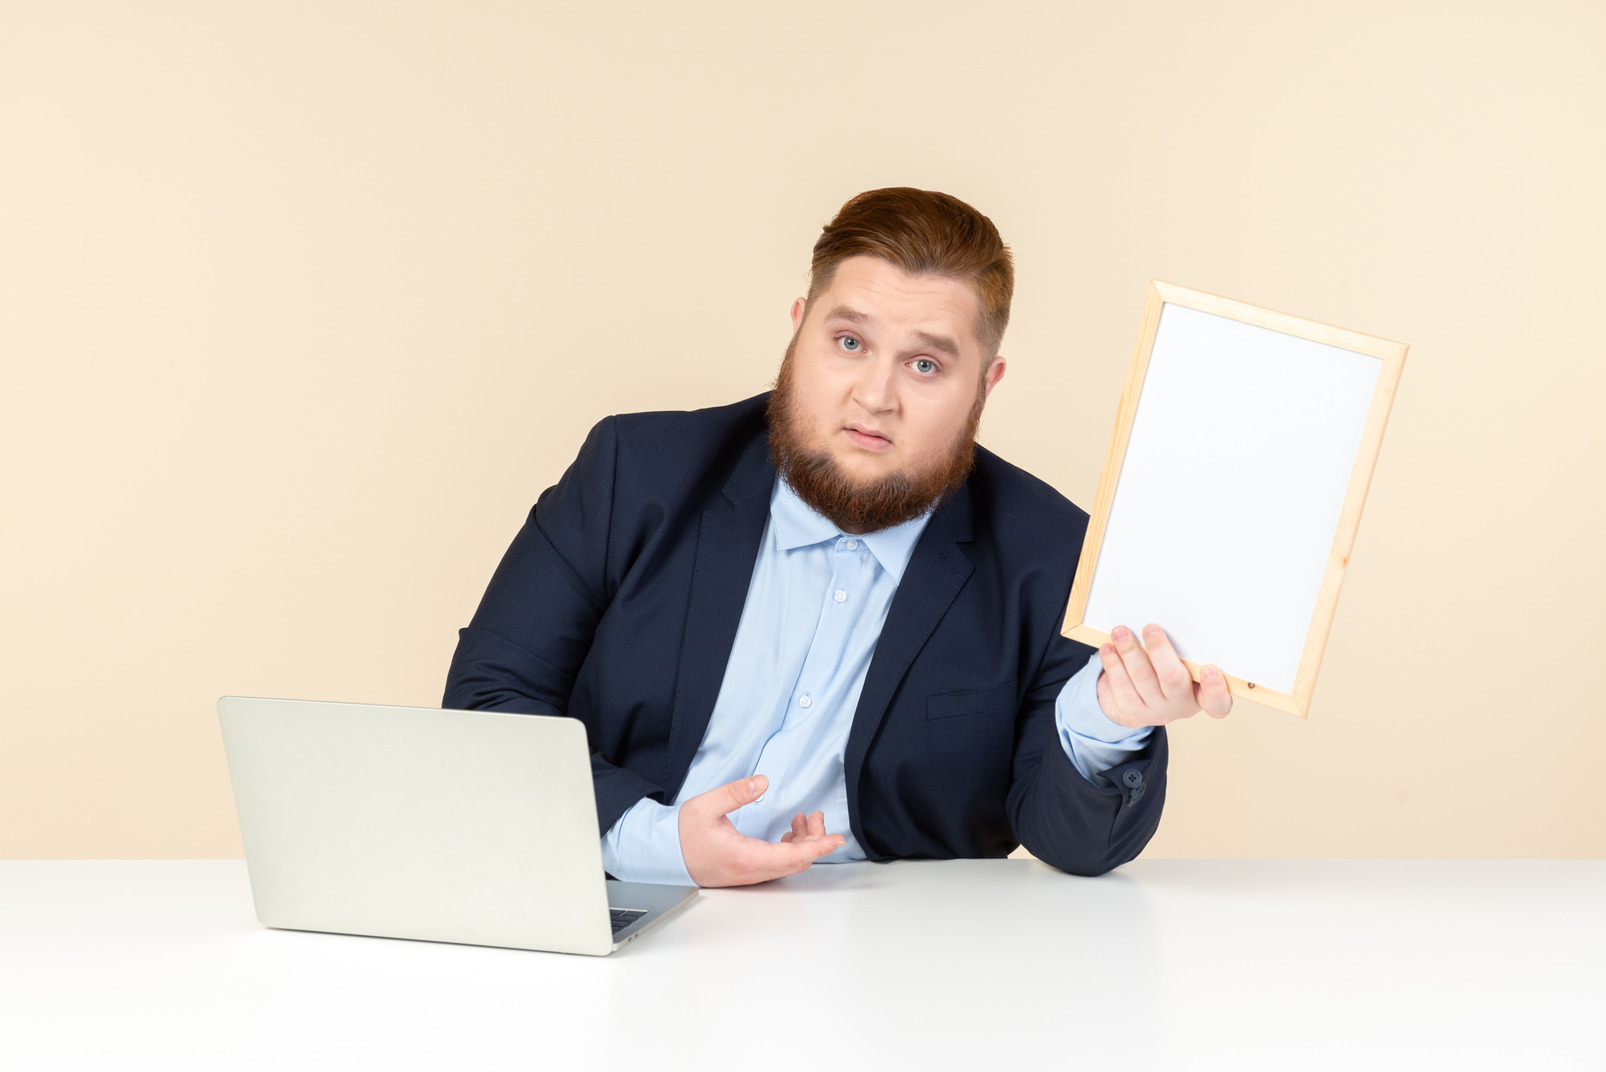 Young overweight man sitting at the desk and holding picture frame